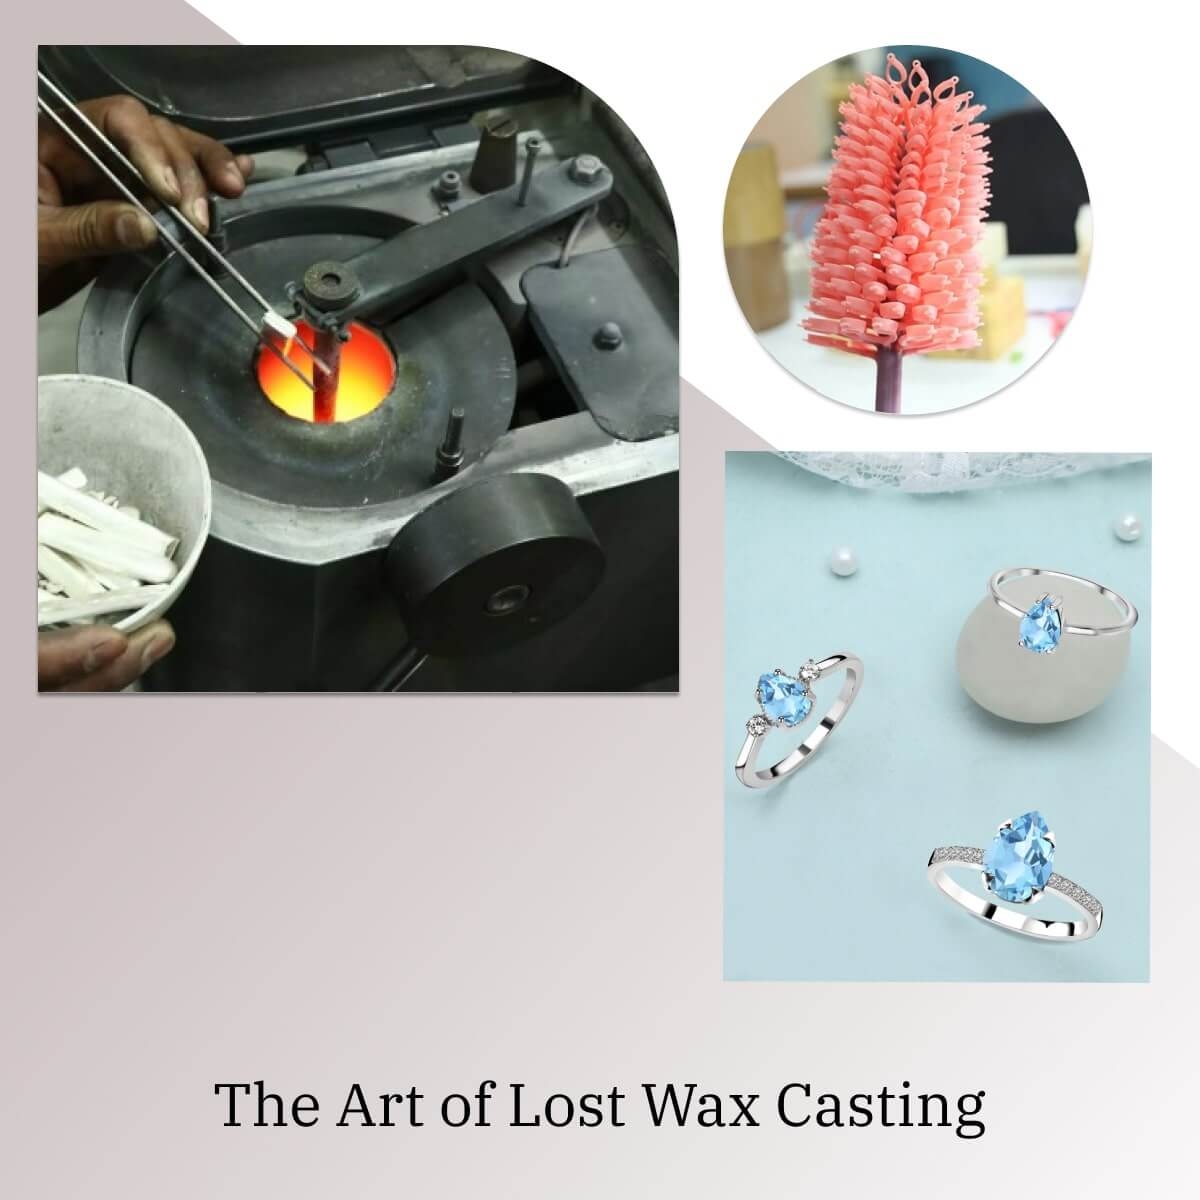 Process Of Lost Wax Casting